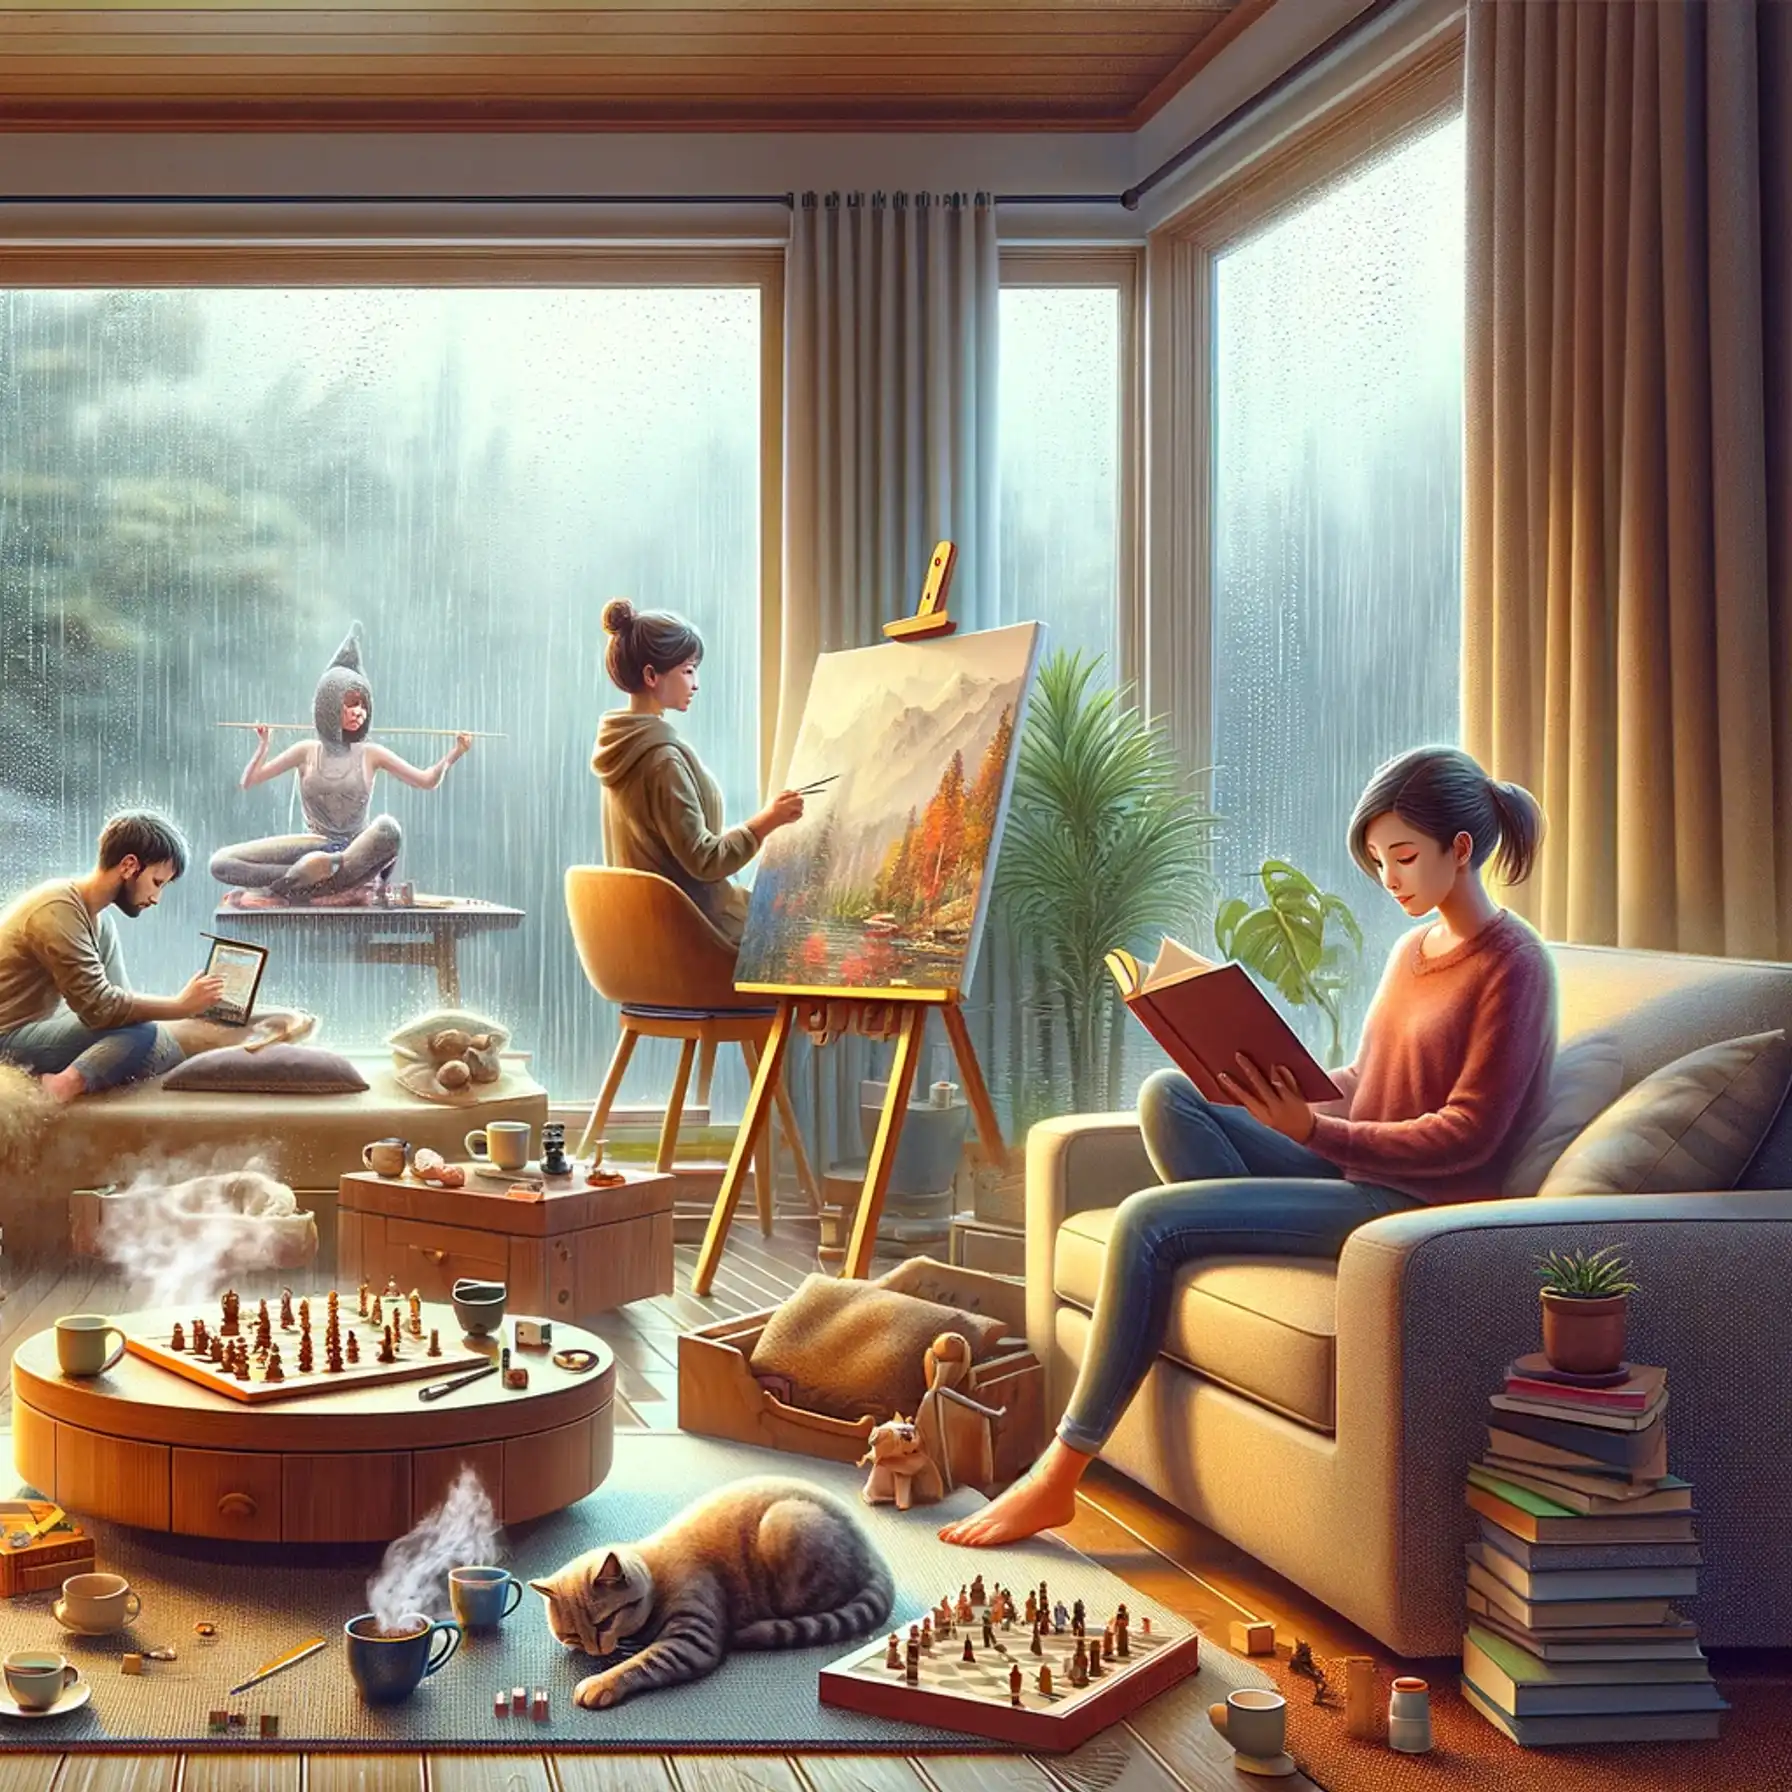 The top 10 indoor activities to enjoy on a rainy day